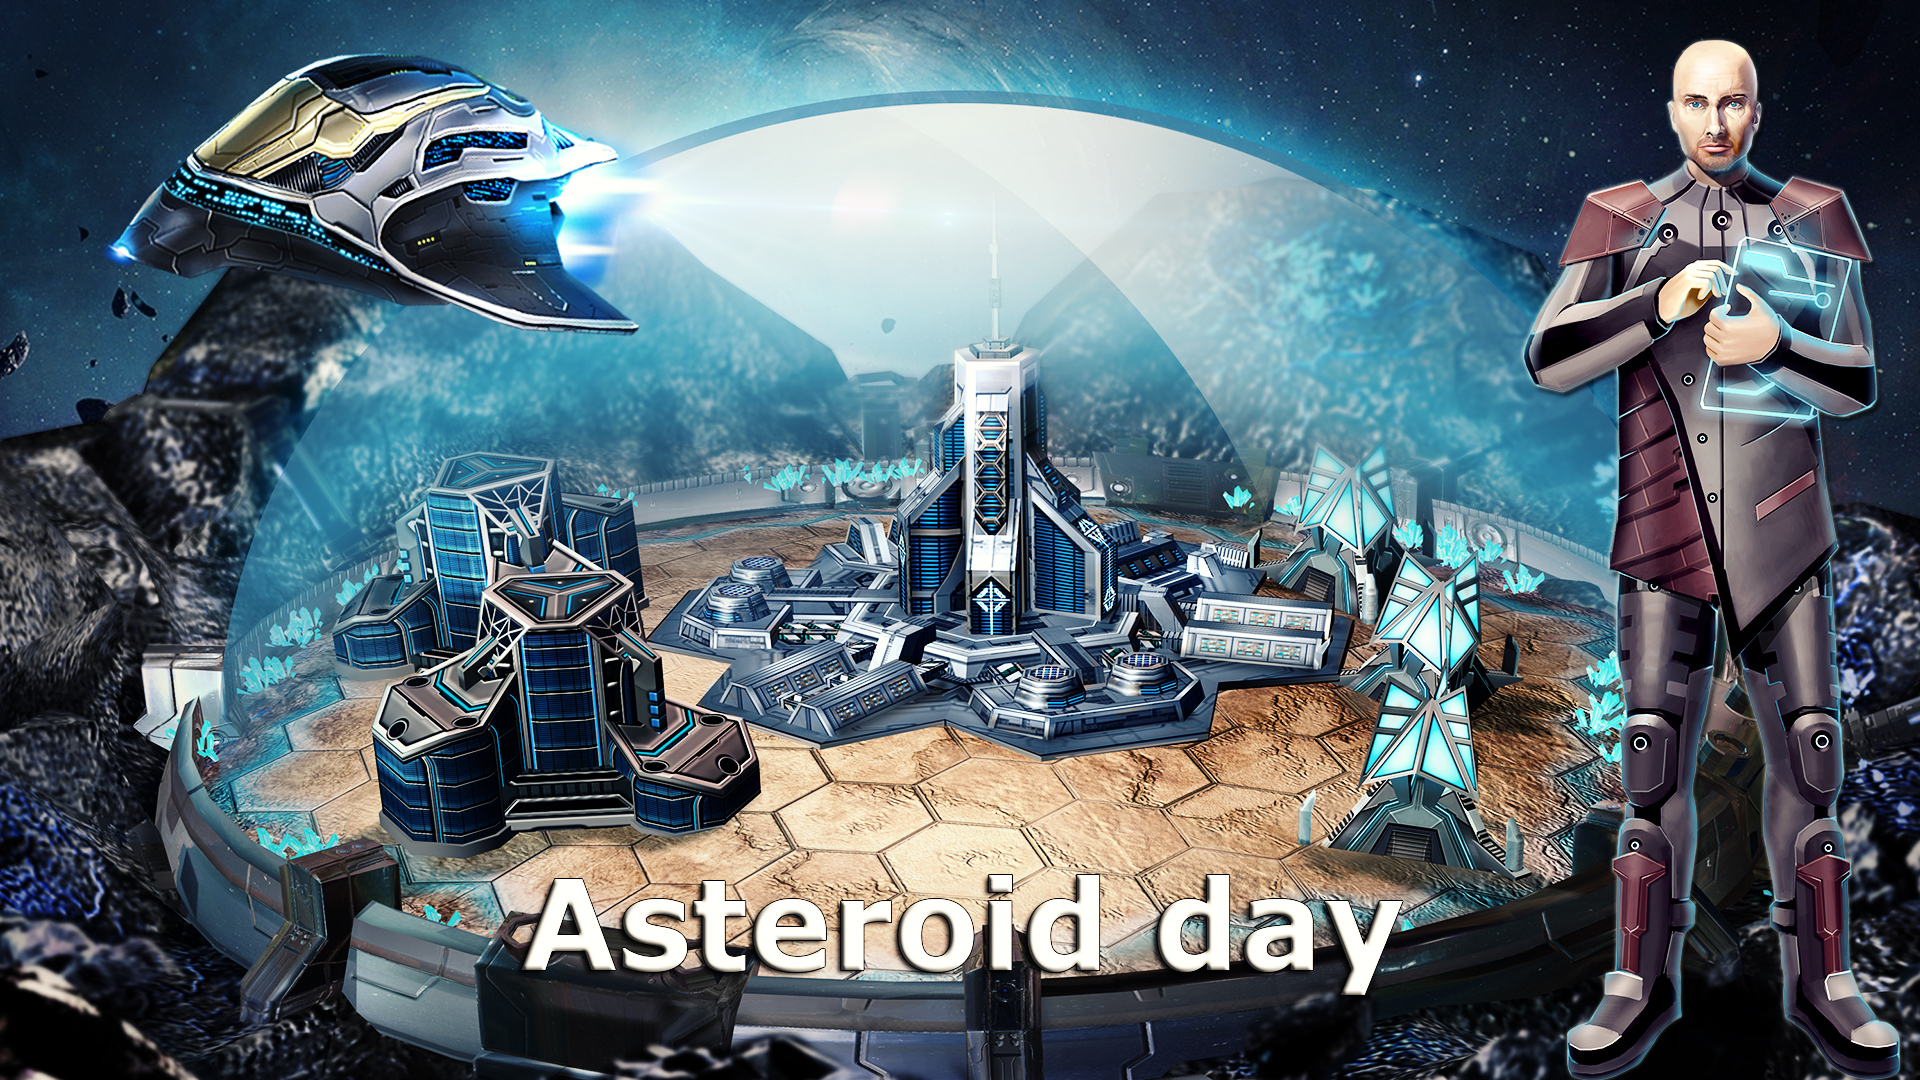 asteroid day astrolords lord game mmo online unity3d strategy